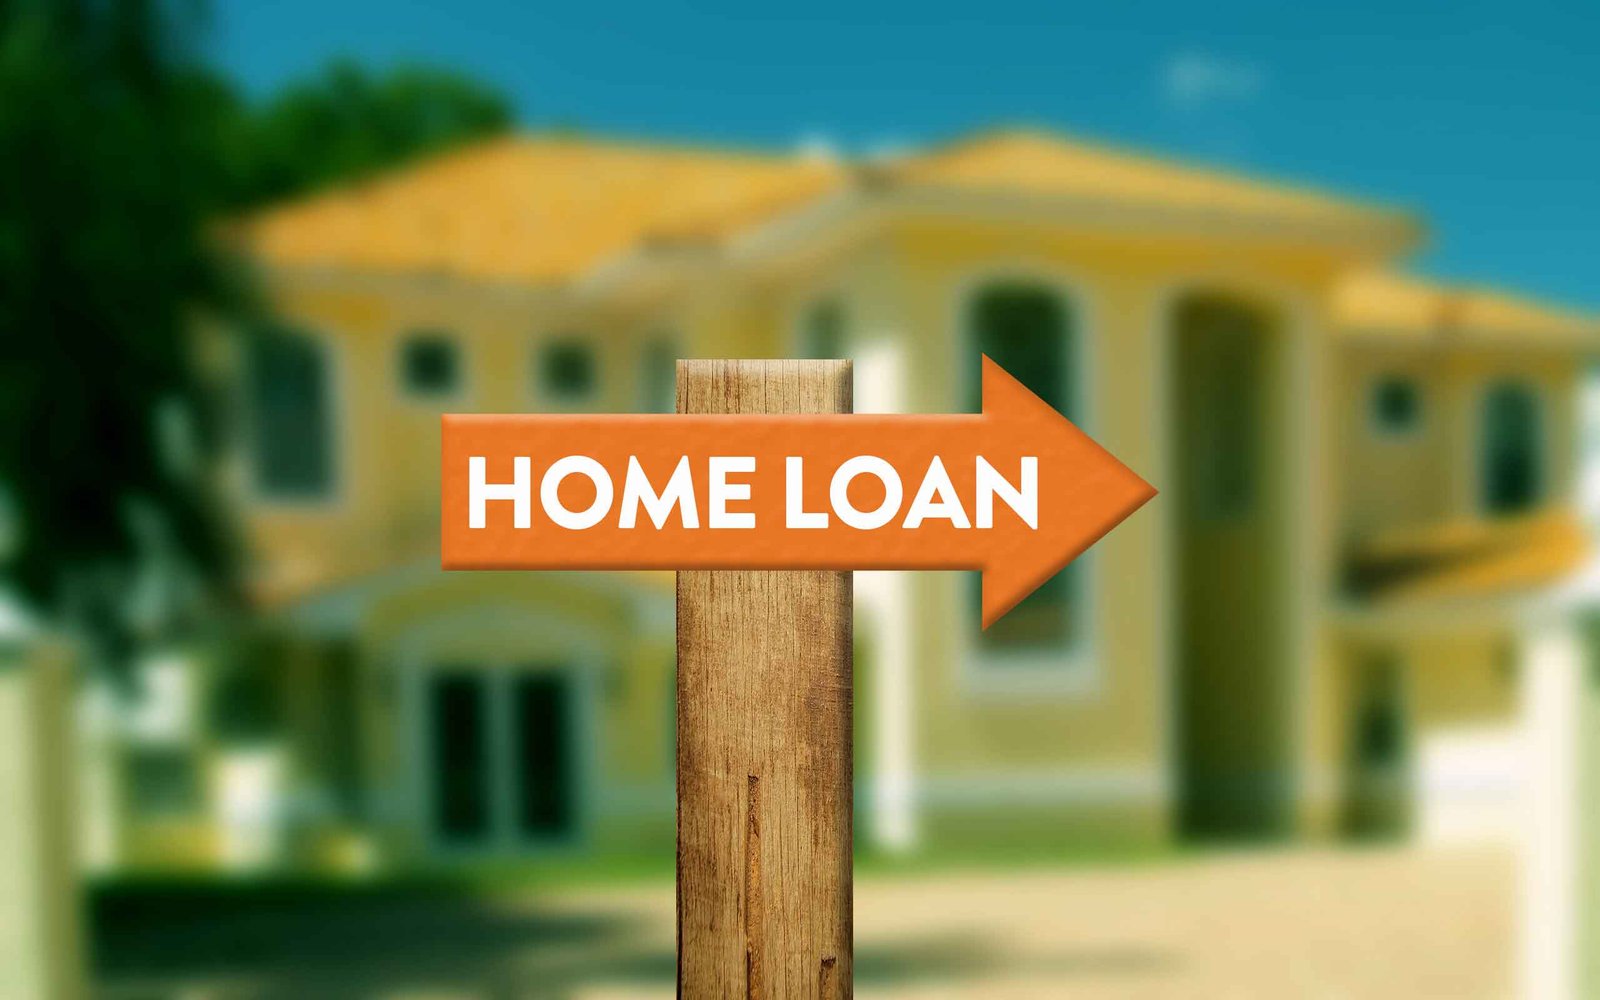 Step-by-step guide to the home loan eligibility process